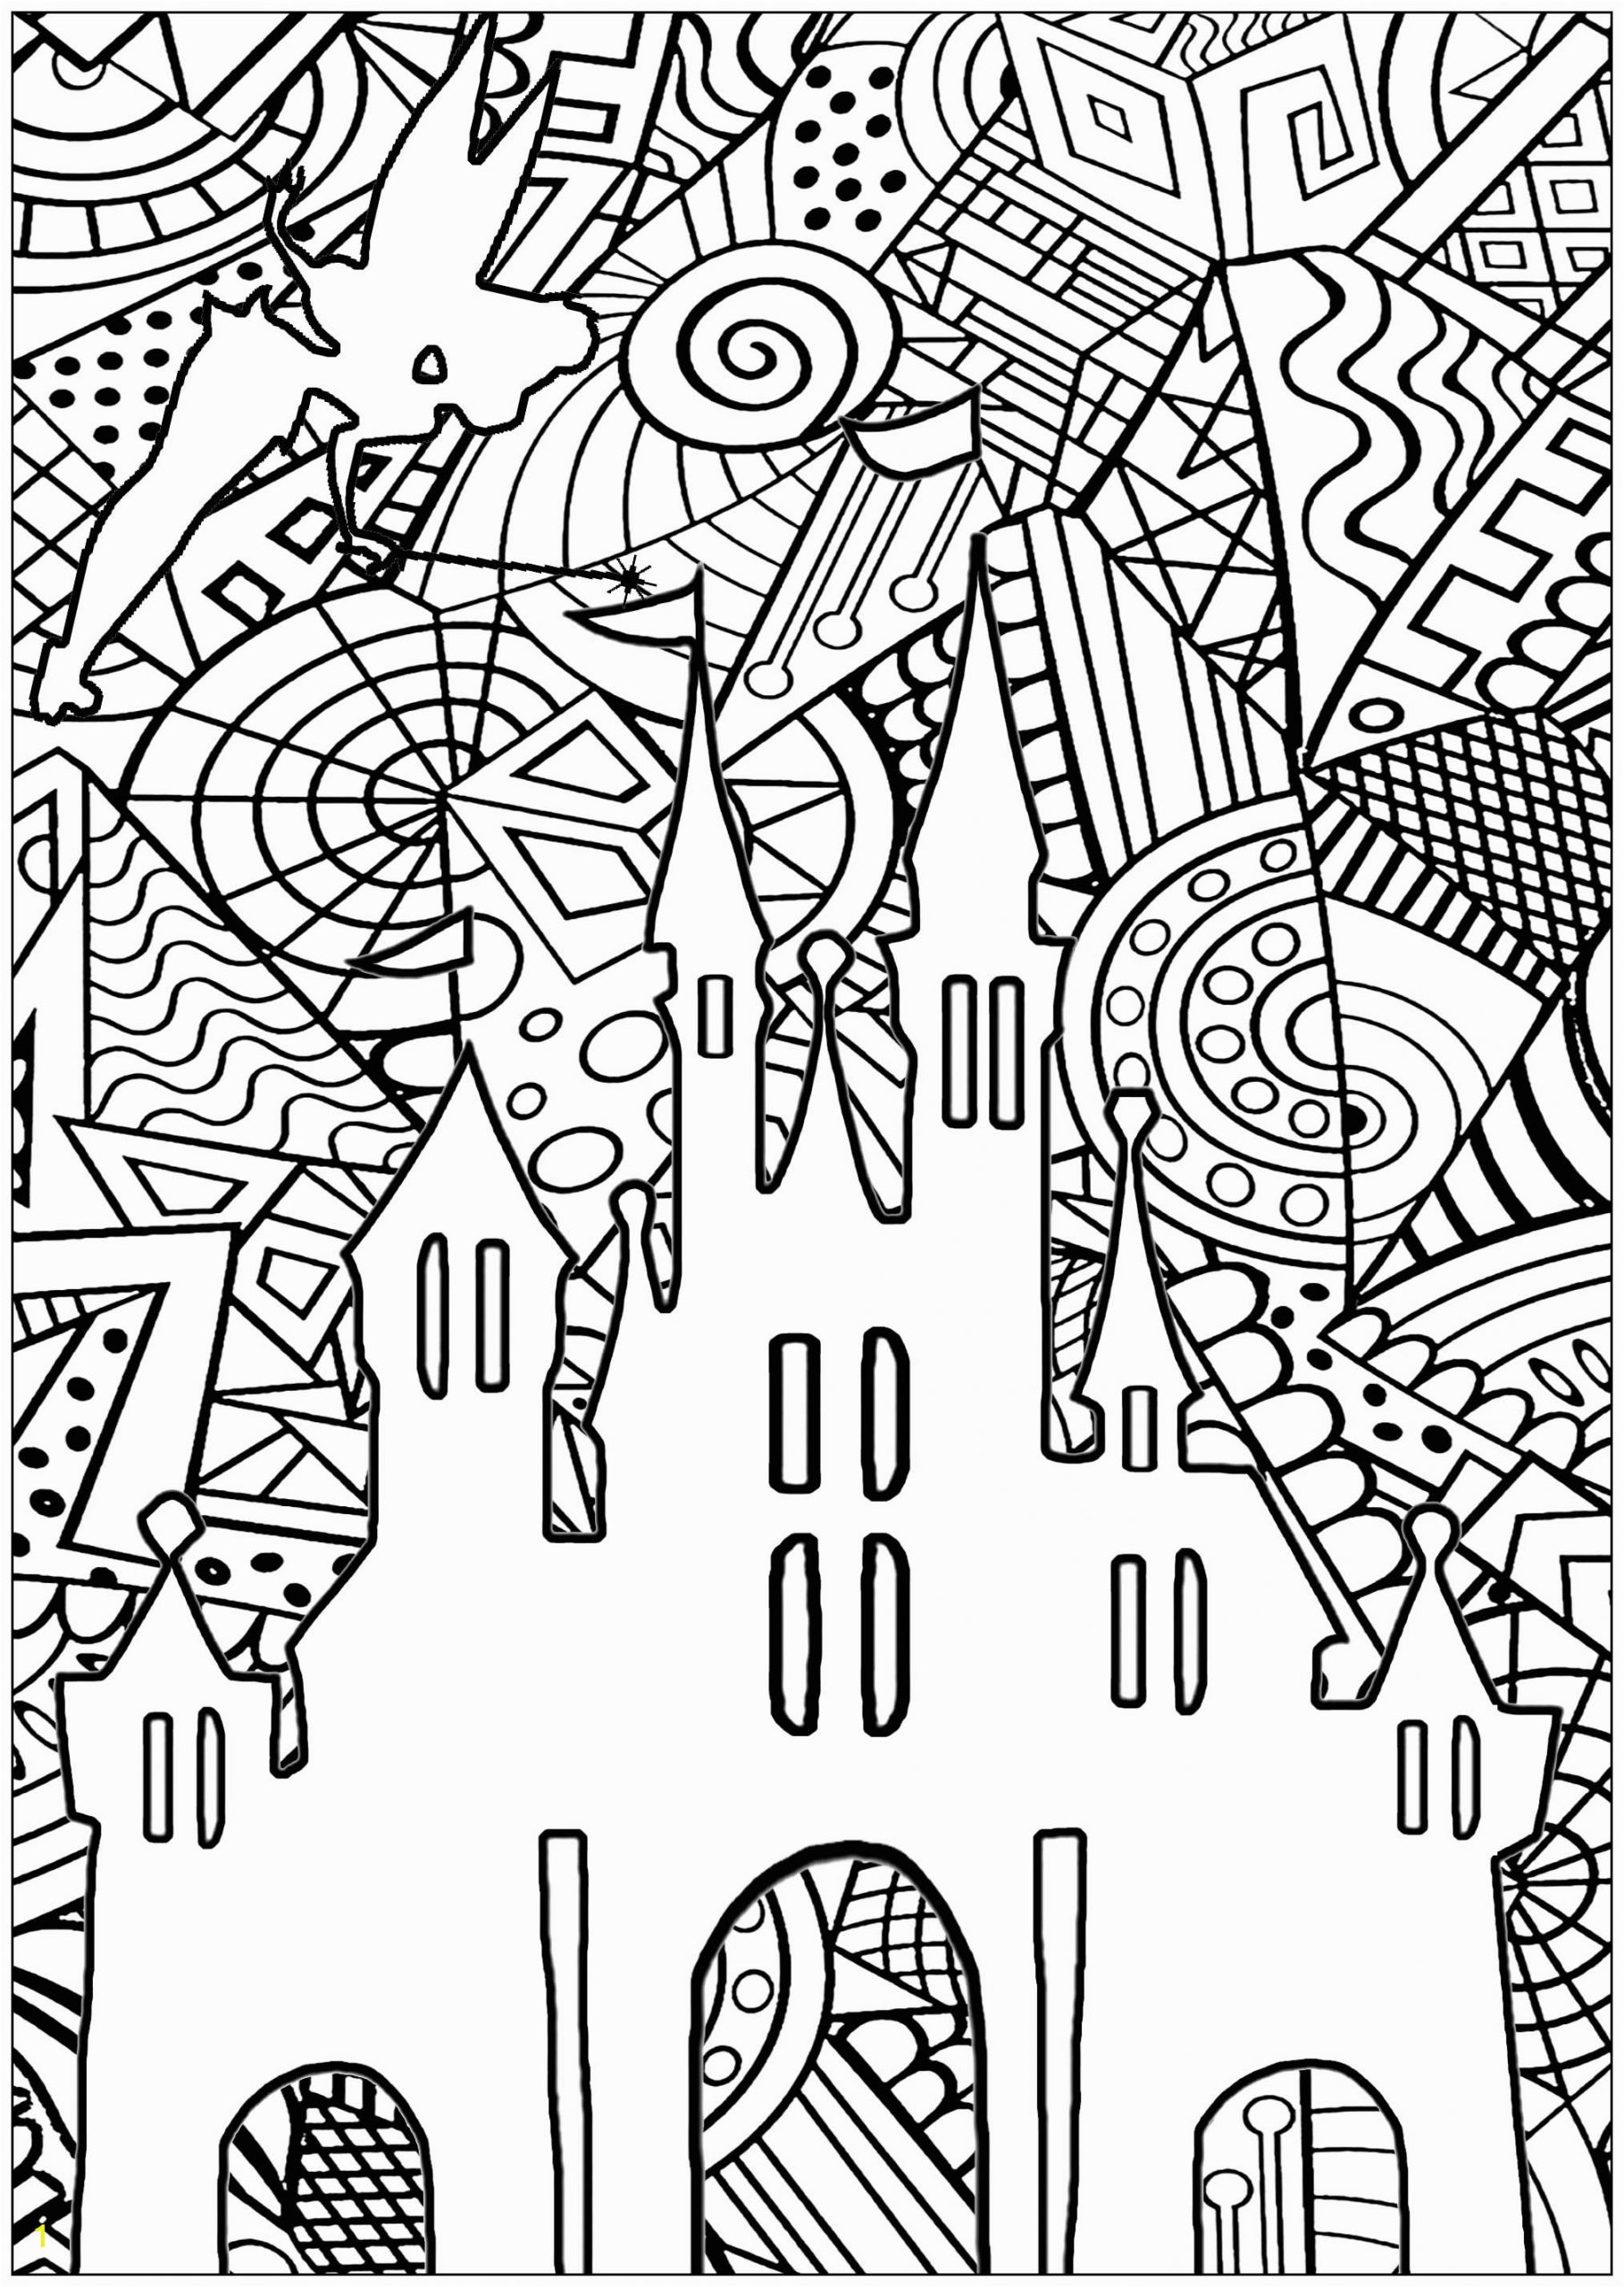 Disney Coloring Pages for Adults Pdf Disney Coloring Pages for Adults Pdf